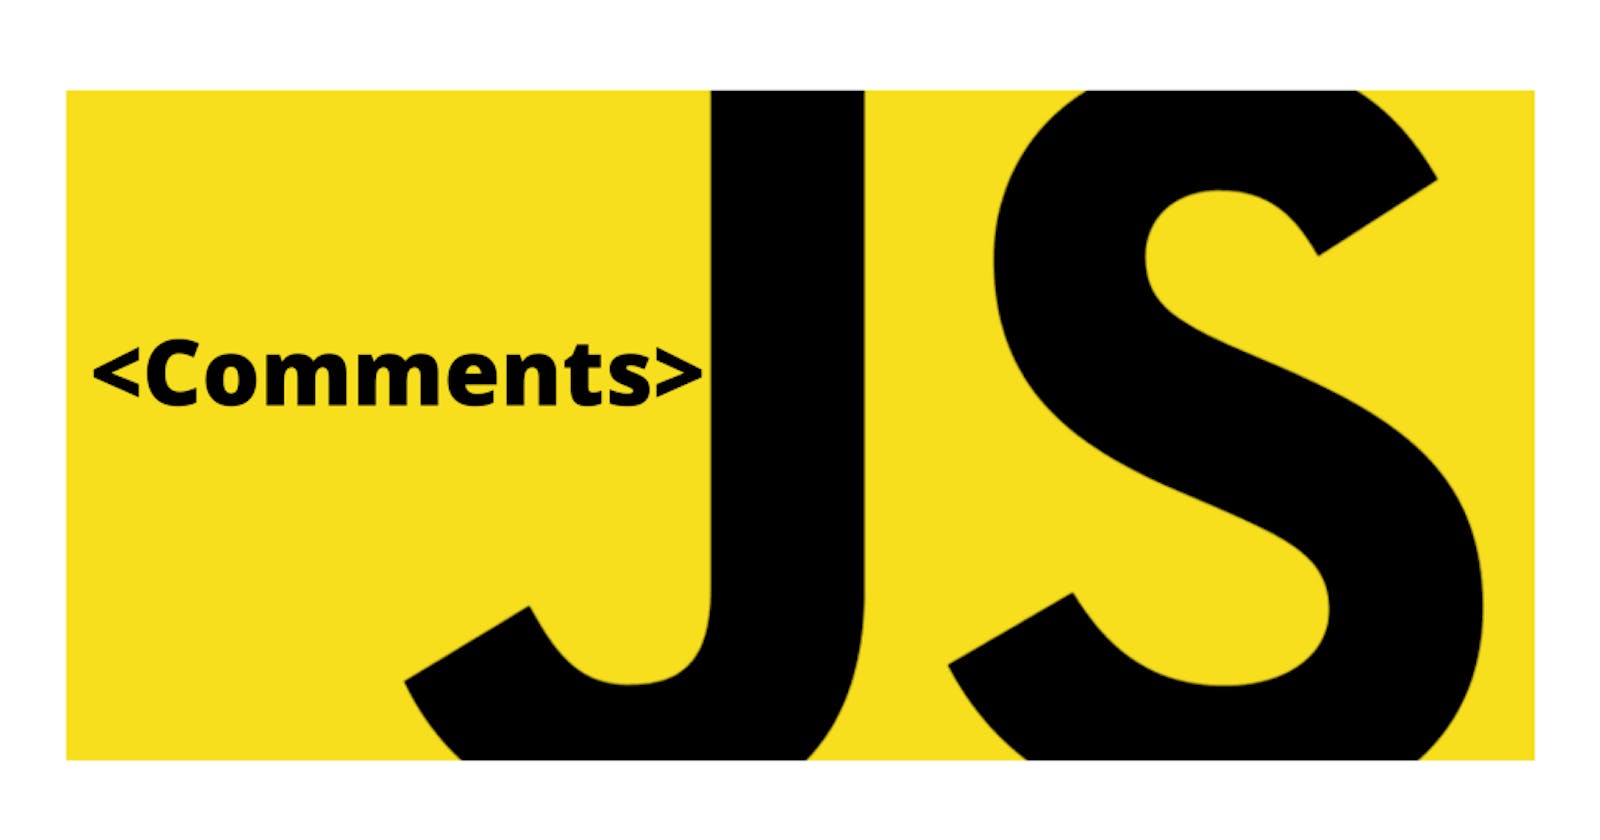 How to add comments in Javascript